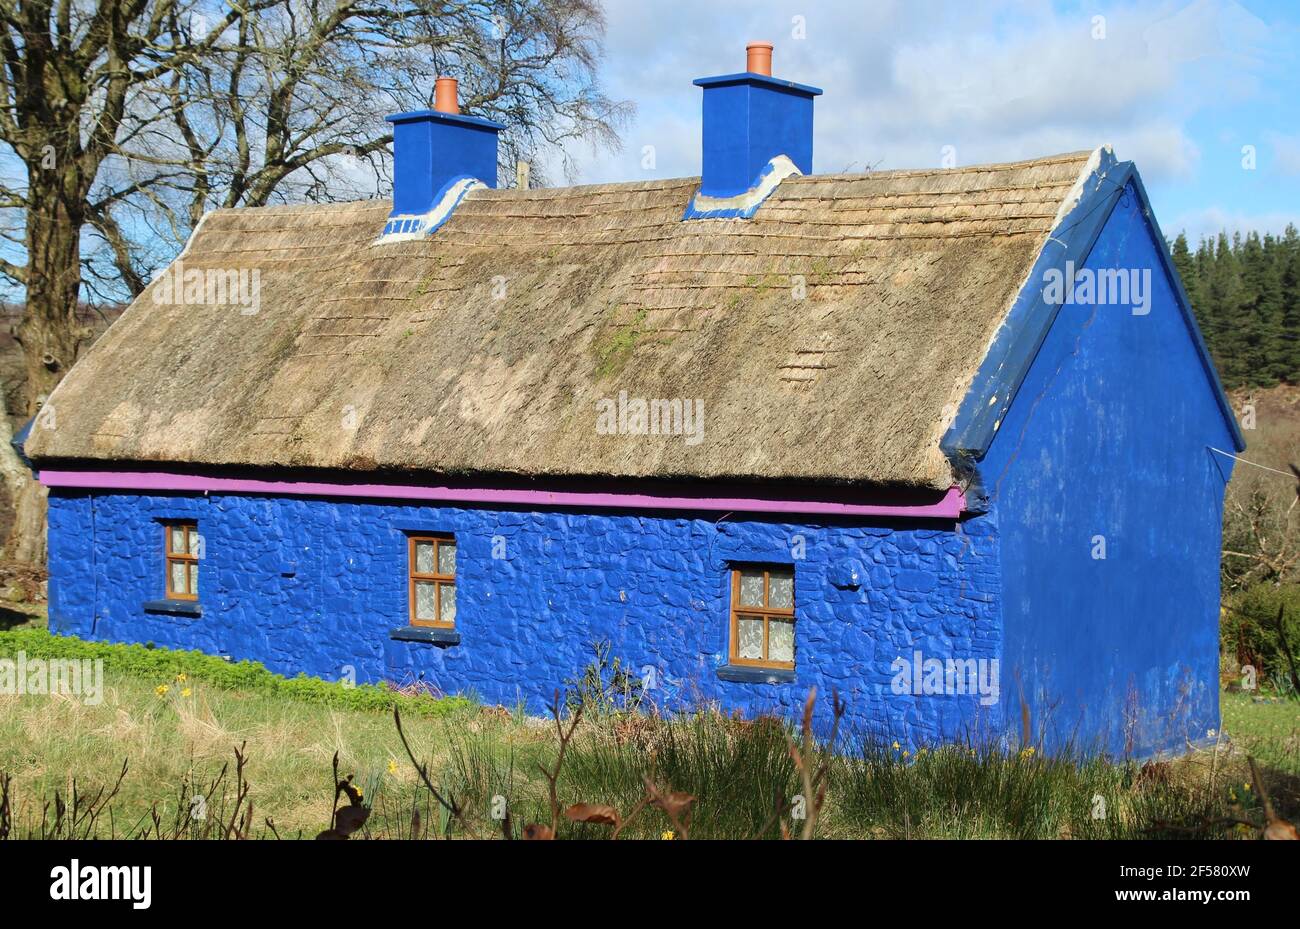 Thatched blue cottage house in rural setting in Ireland Stock Photo